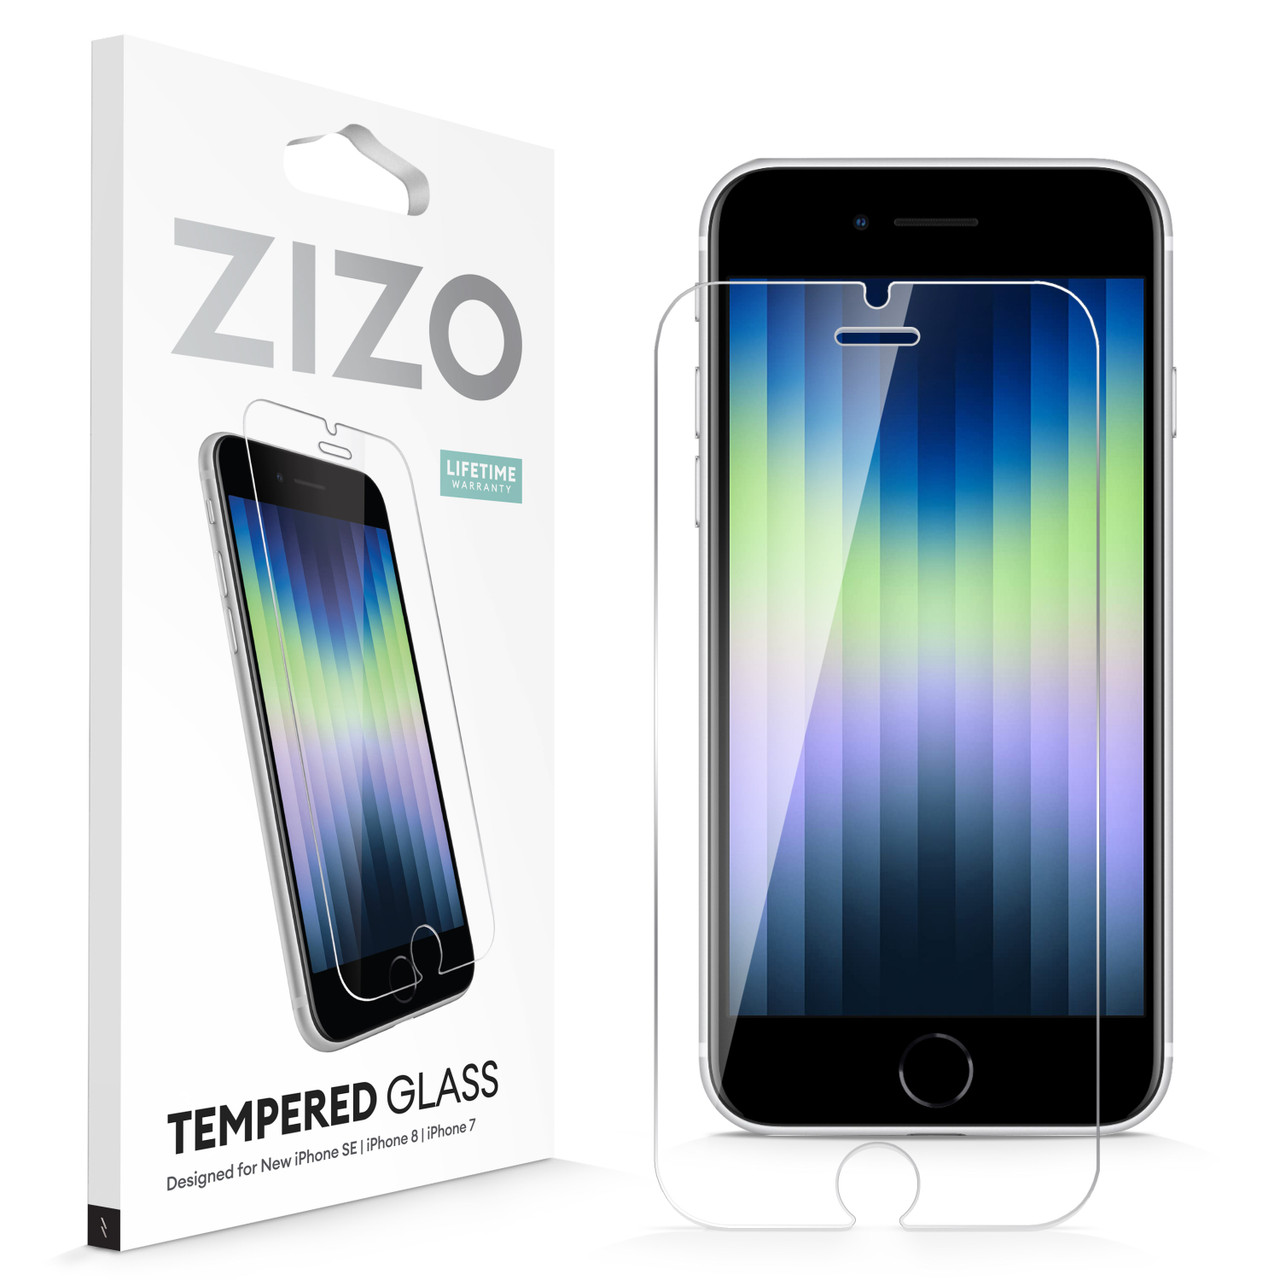 ZIZO TEMPERED GLASS Screen Protector for iPhone SE (3rd and 2nd gen)/8/7